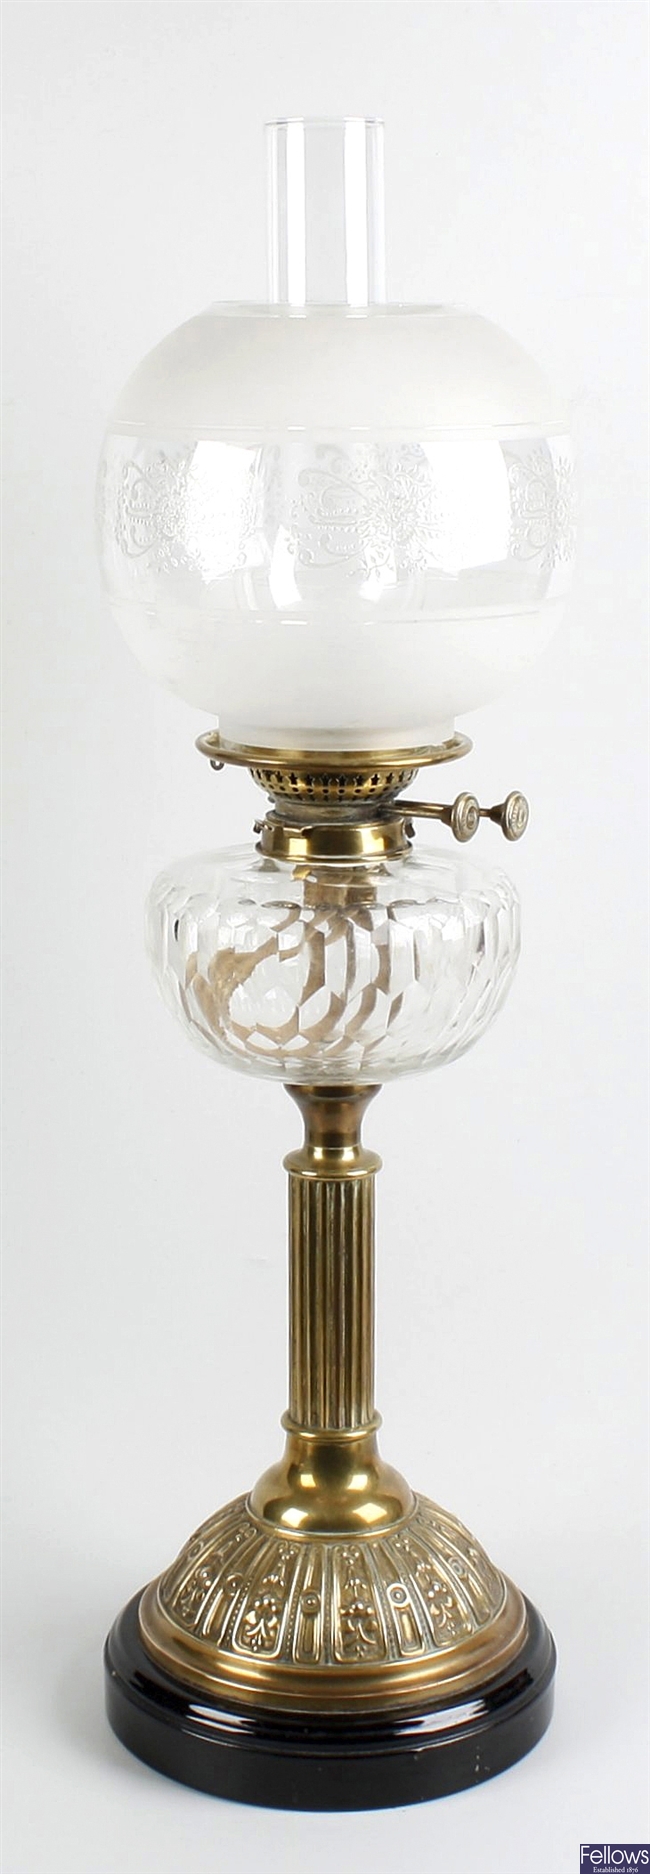 19th century oil lamp with glass reservoir lamp shade and chimney.